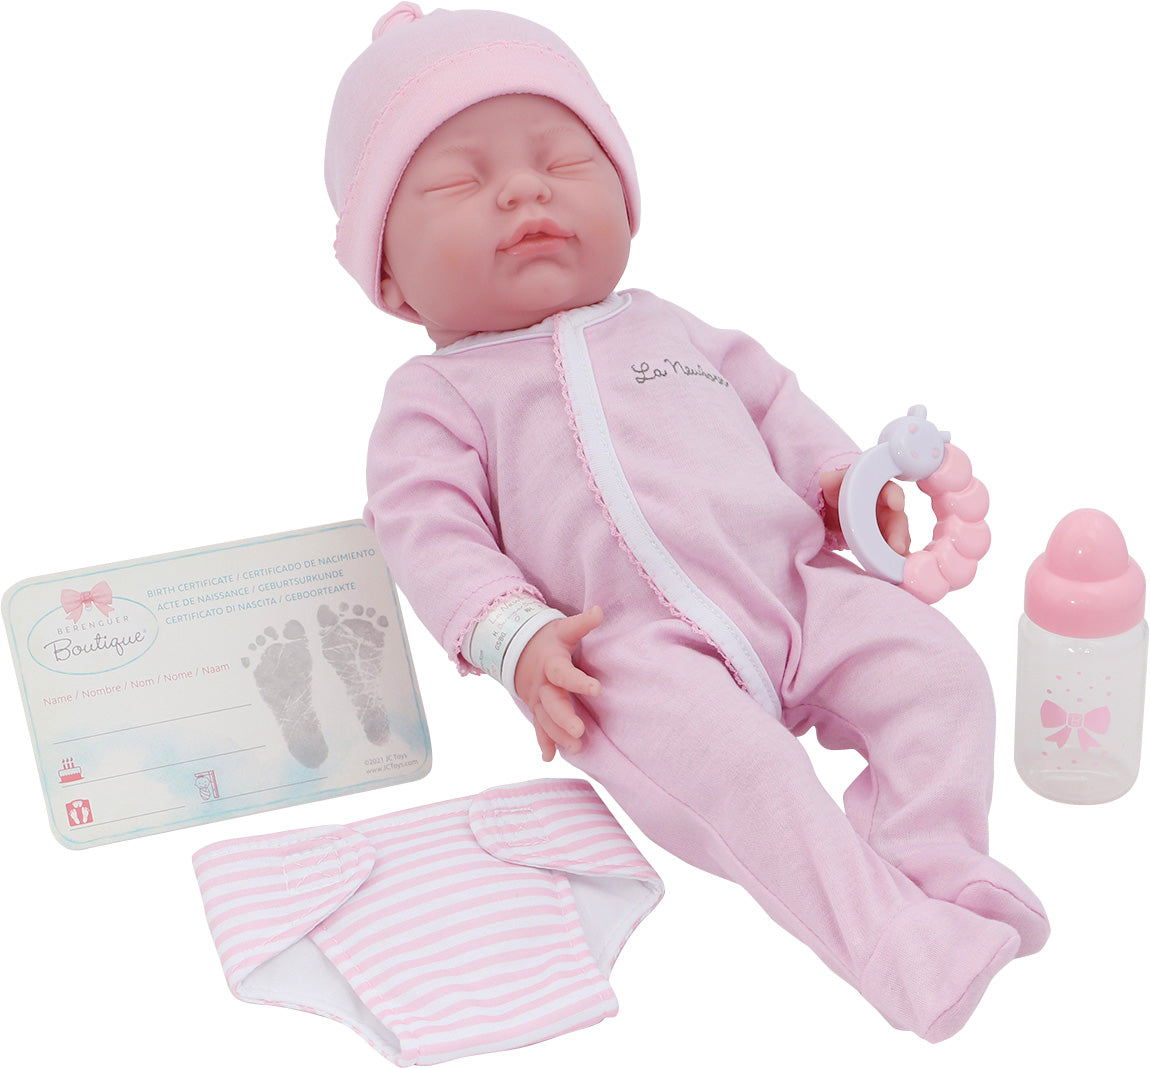 Picture of JC Toys 18300 La Newborn Doll All-Vinyl Retro Closed Eyes in Pink Set with Accessories Real Girl Window Box